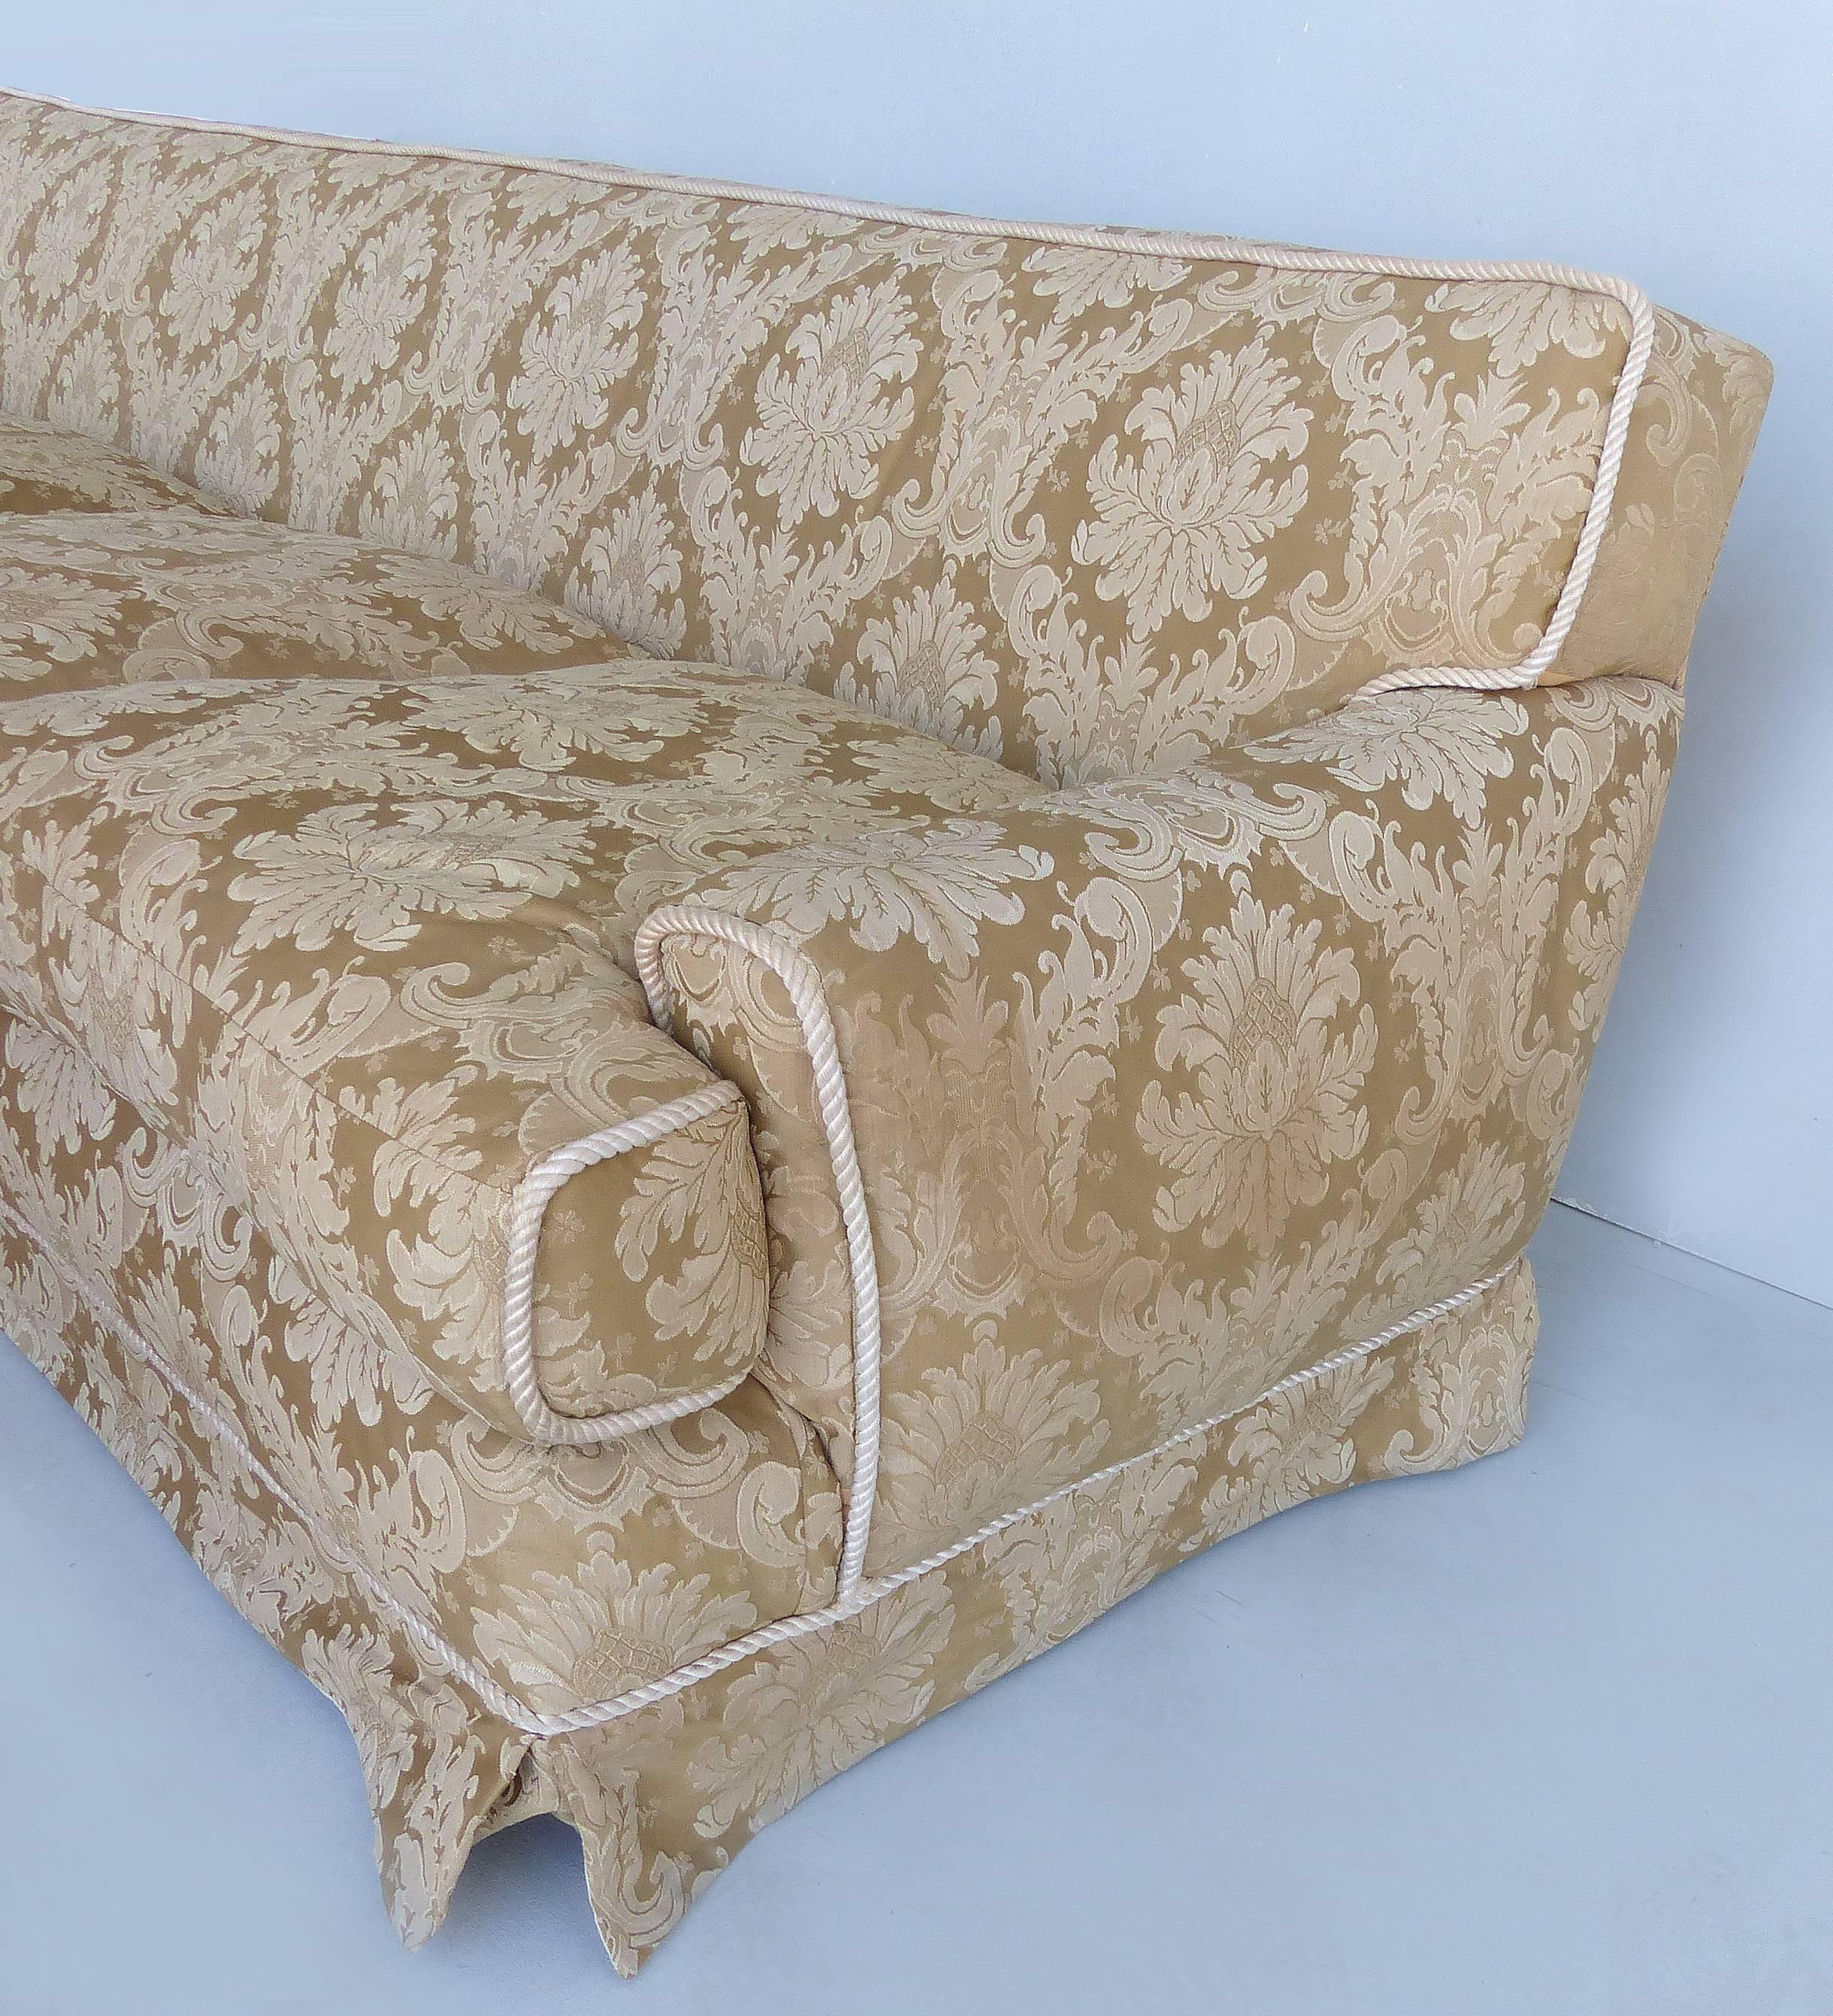 Damask Upholstered Plush Sofa with Rope Trim and Pleated Skirt

Offered for sale is a luxurious damask upholstered sofa with four loose seat cushions, elegant rope trimming, and pleated skirt bottom. Deep, comfortable seats with lush details make